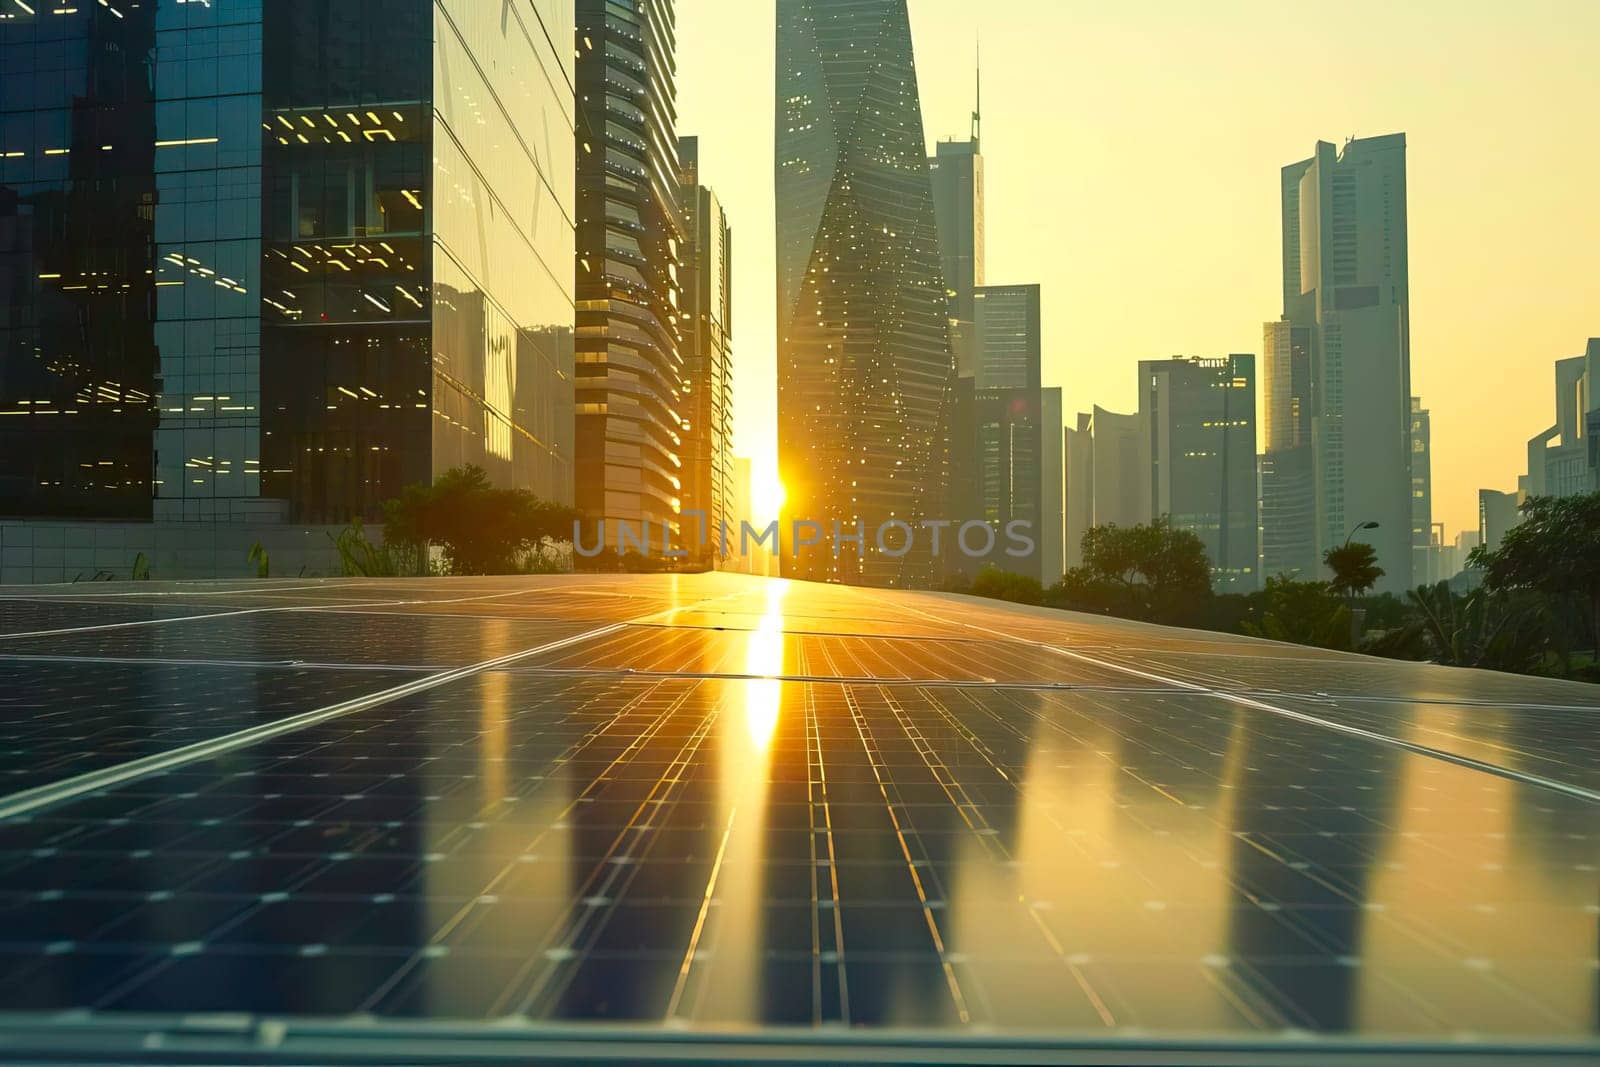 A solar panel capturing energy from the setting sun, against a modern city backdrop. by vladimka